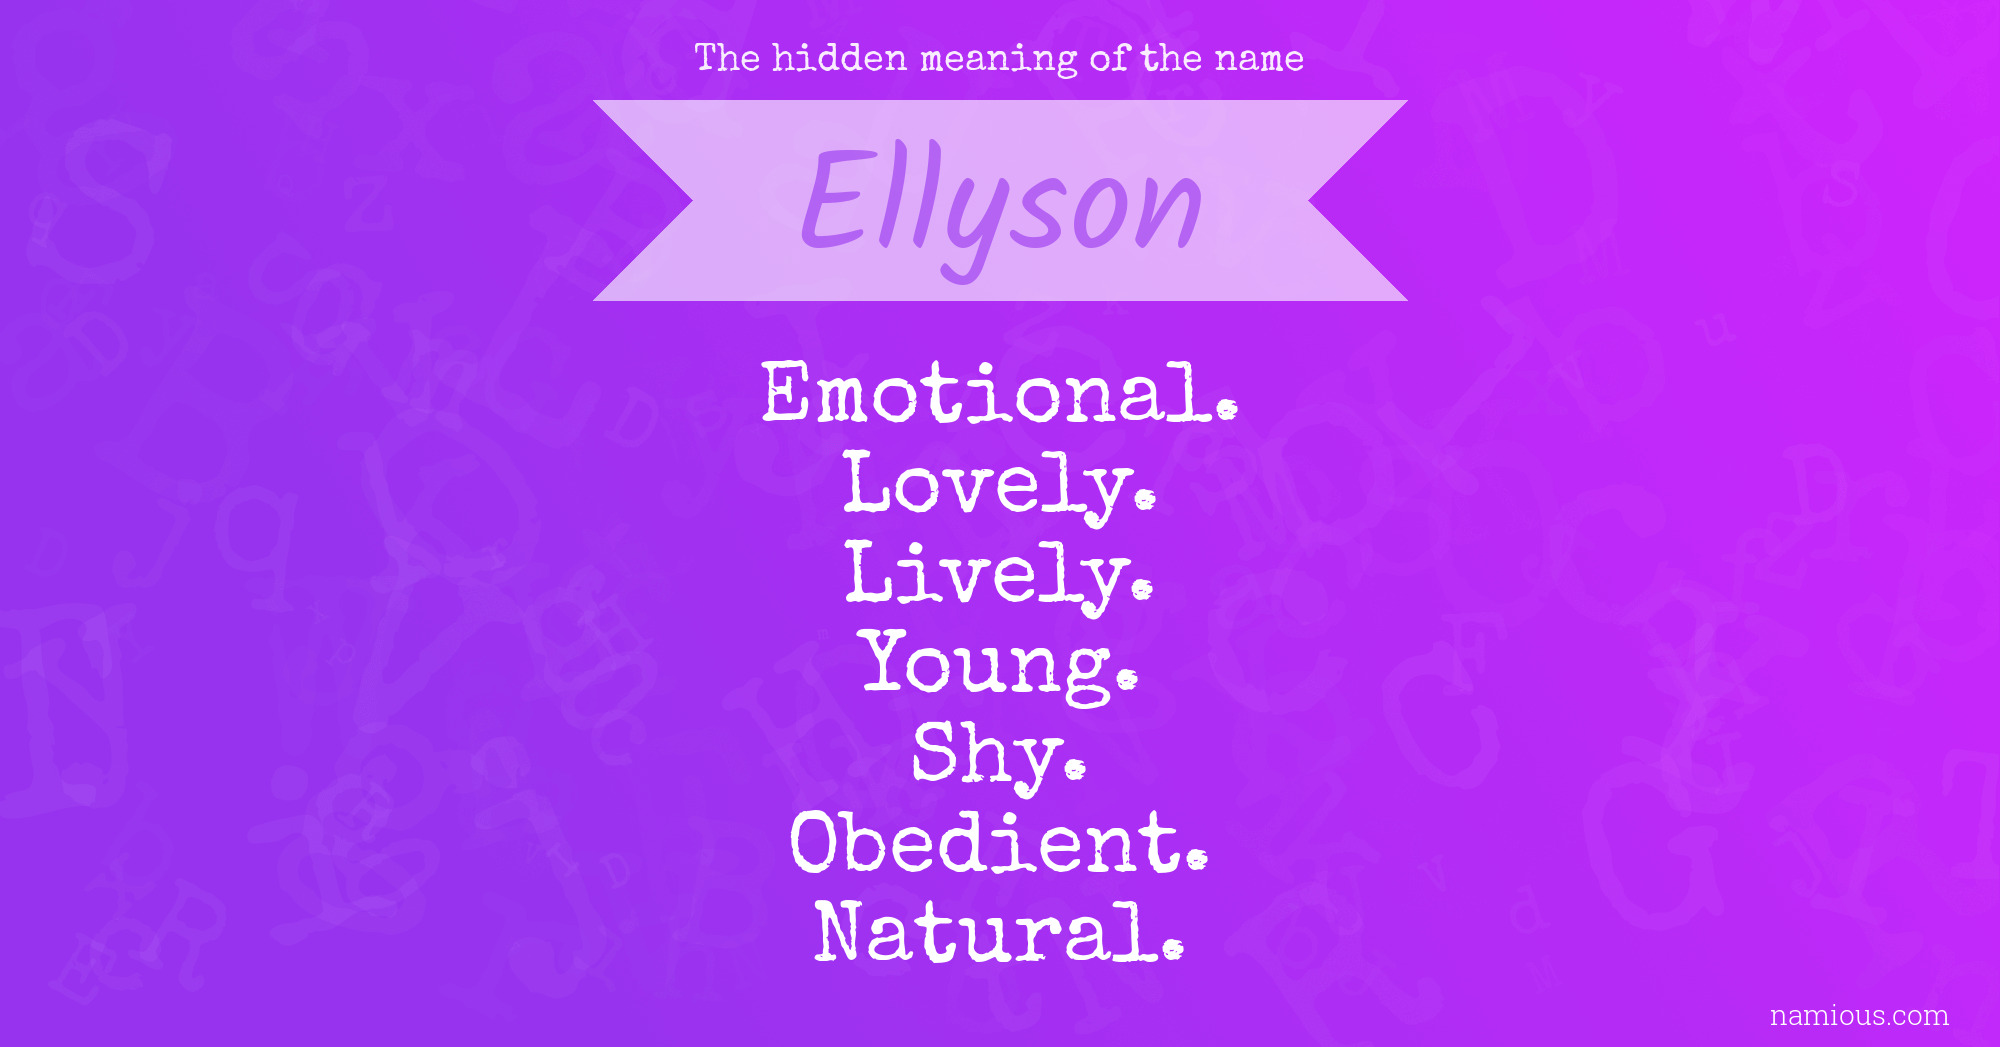 The hidden meaning of the name Ellyson